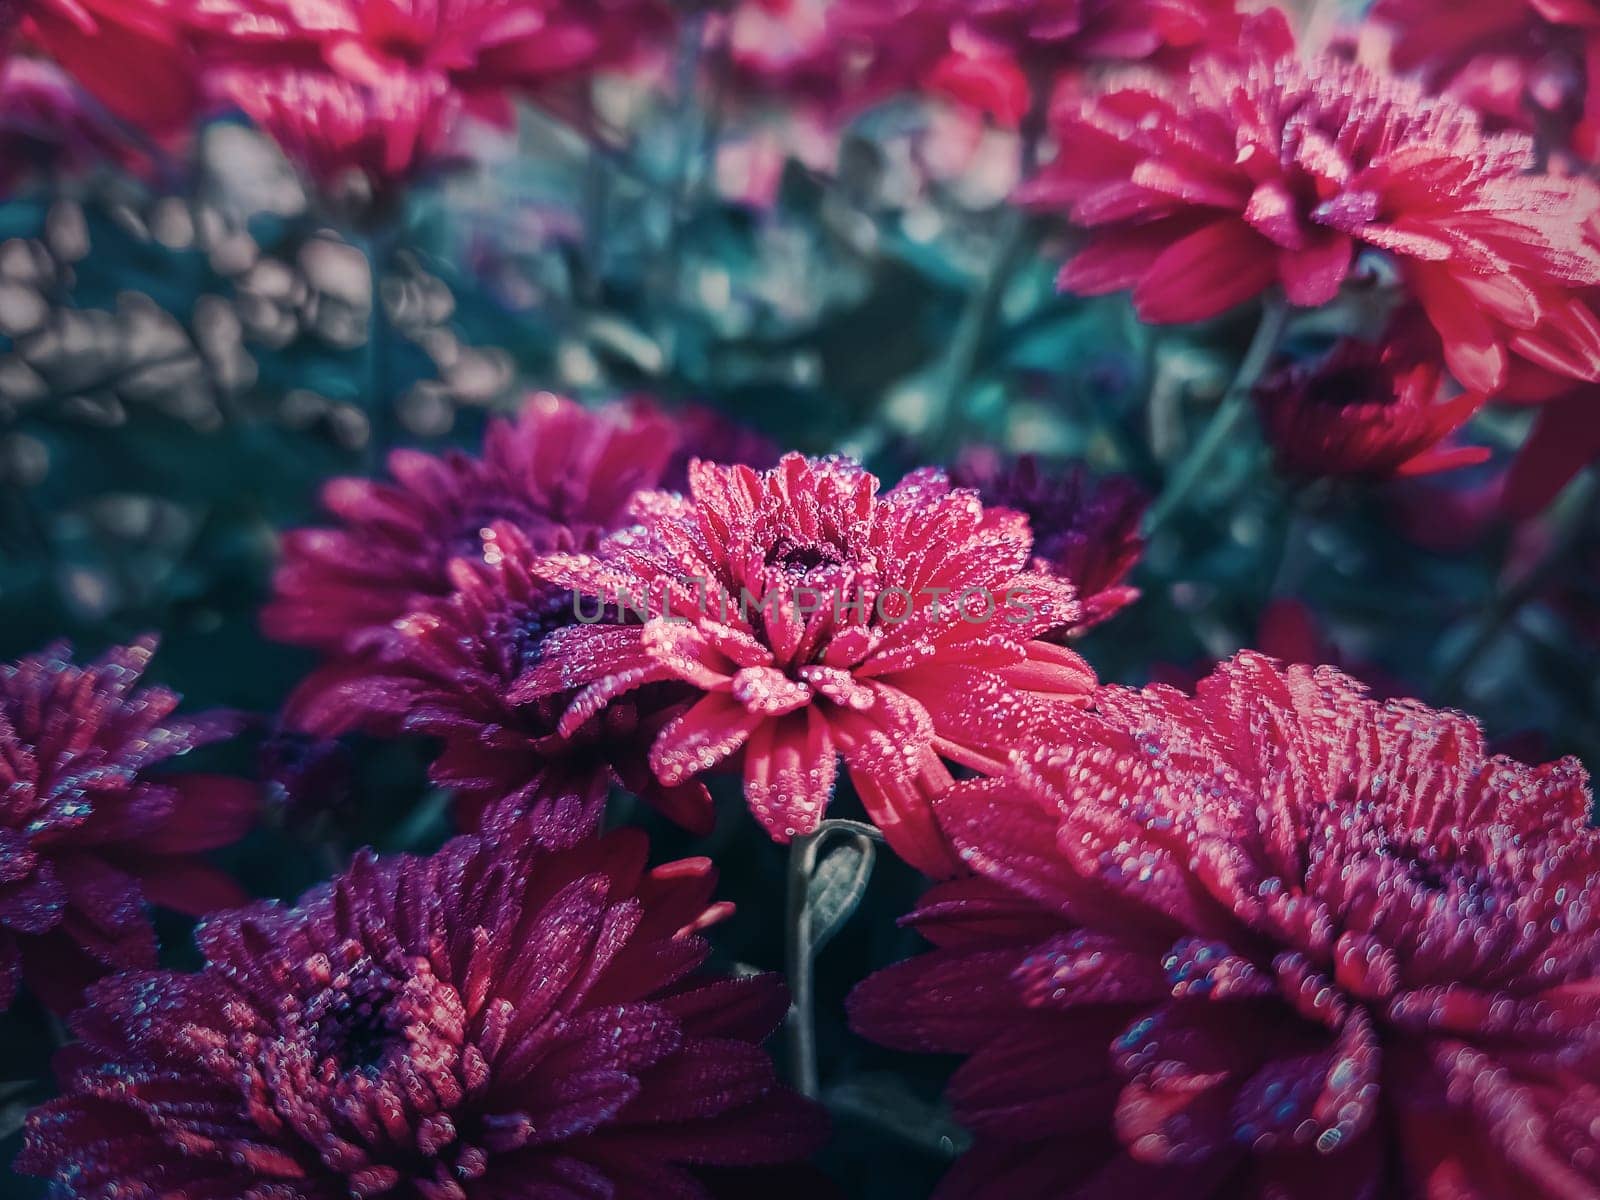 Closeup red chrysanthemum flowers in the garden with morning dew drops on the petals. Beautiful, crimson floral bouquet background by psychoshadow